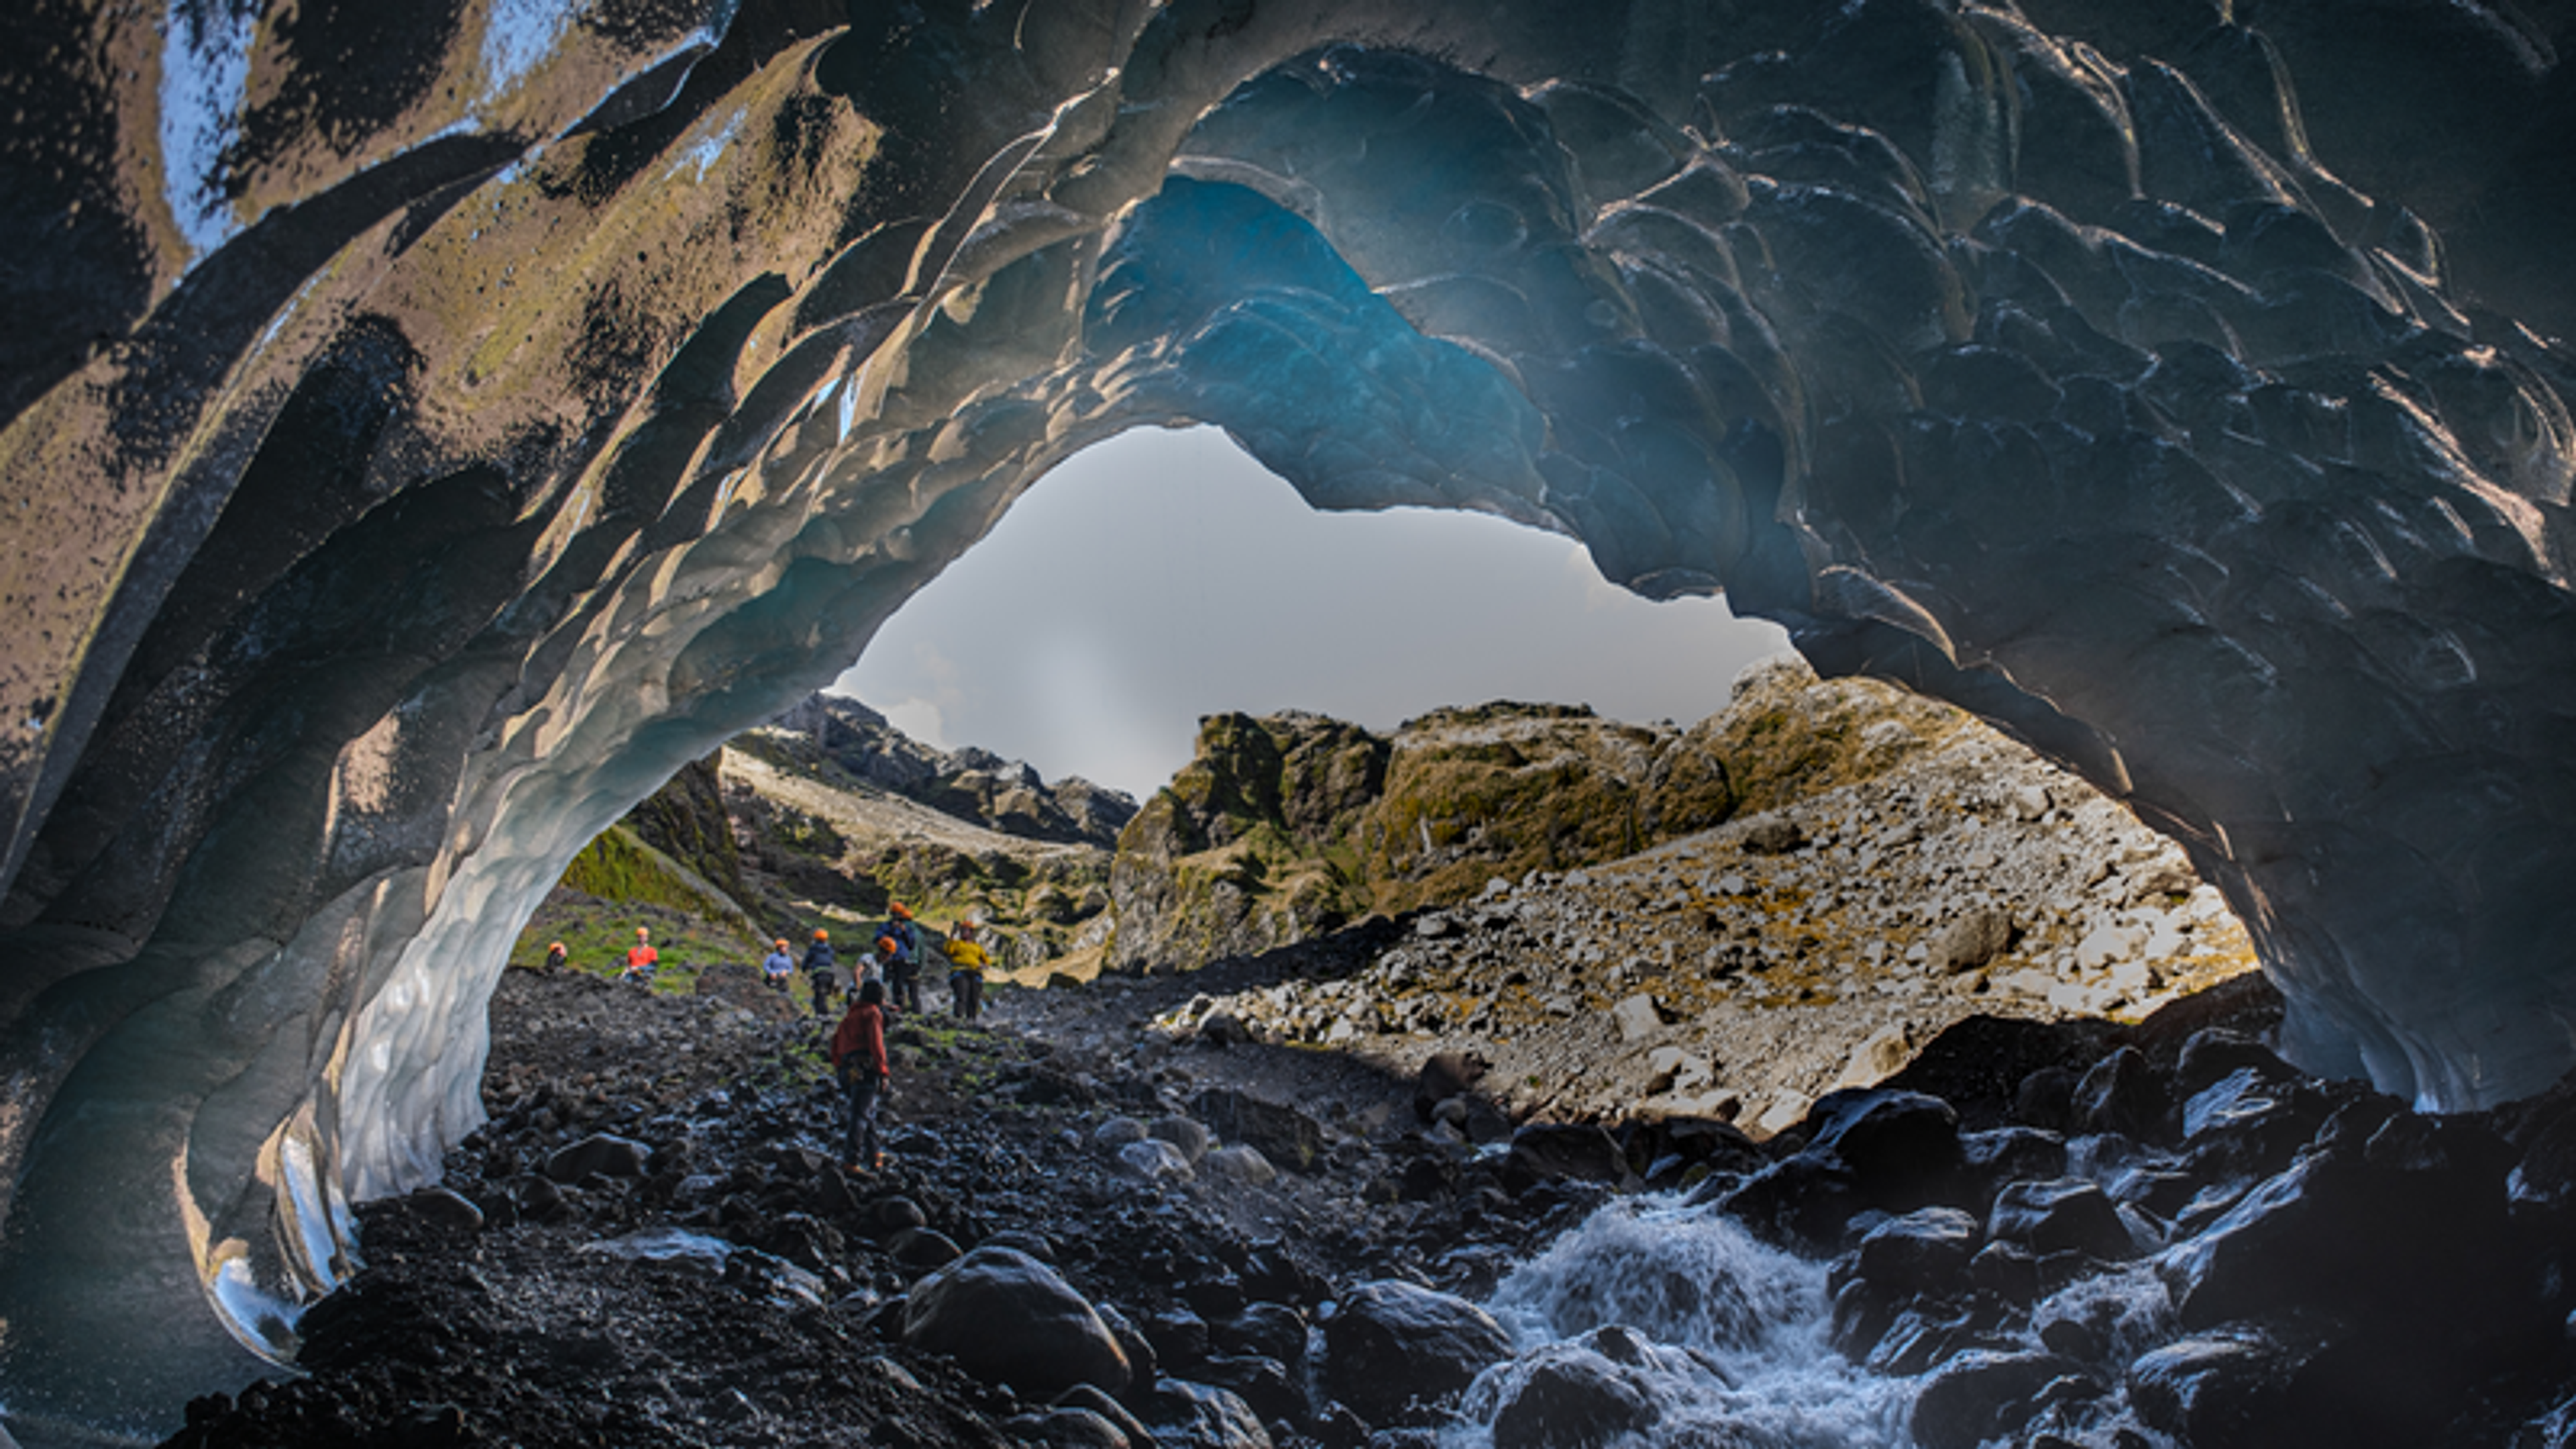 Ice Cave entrance in Skaftafell, Iceland.